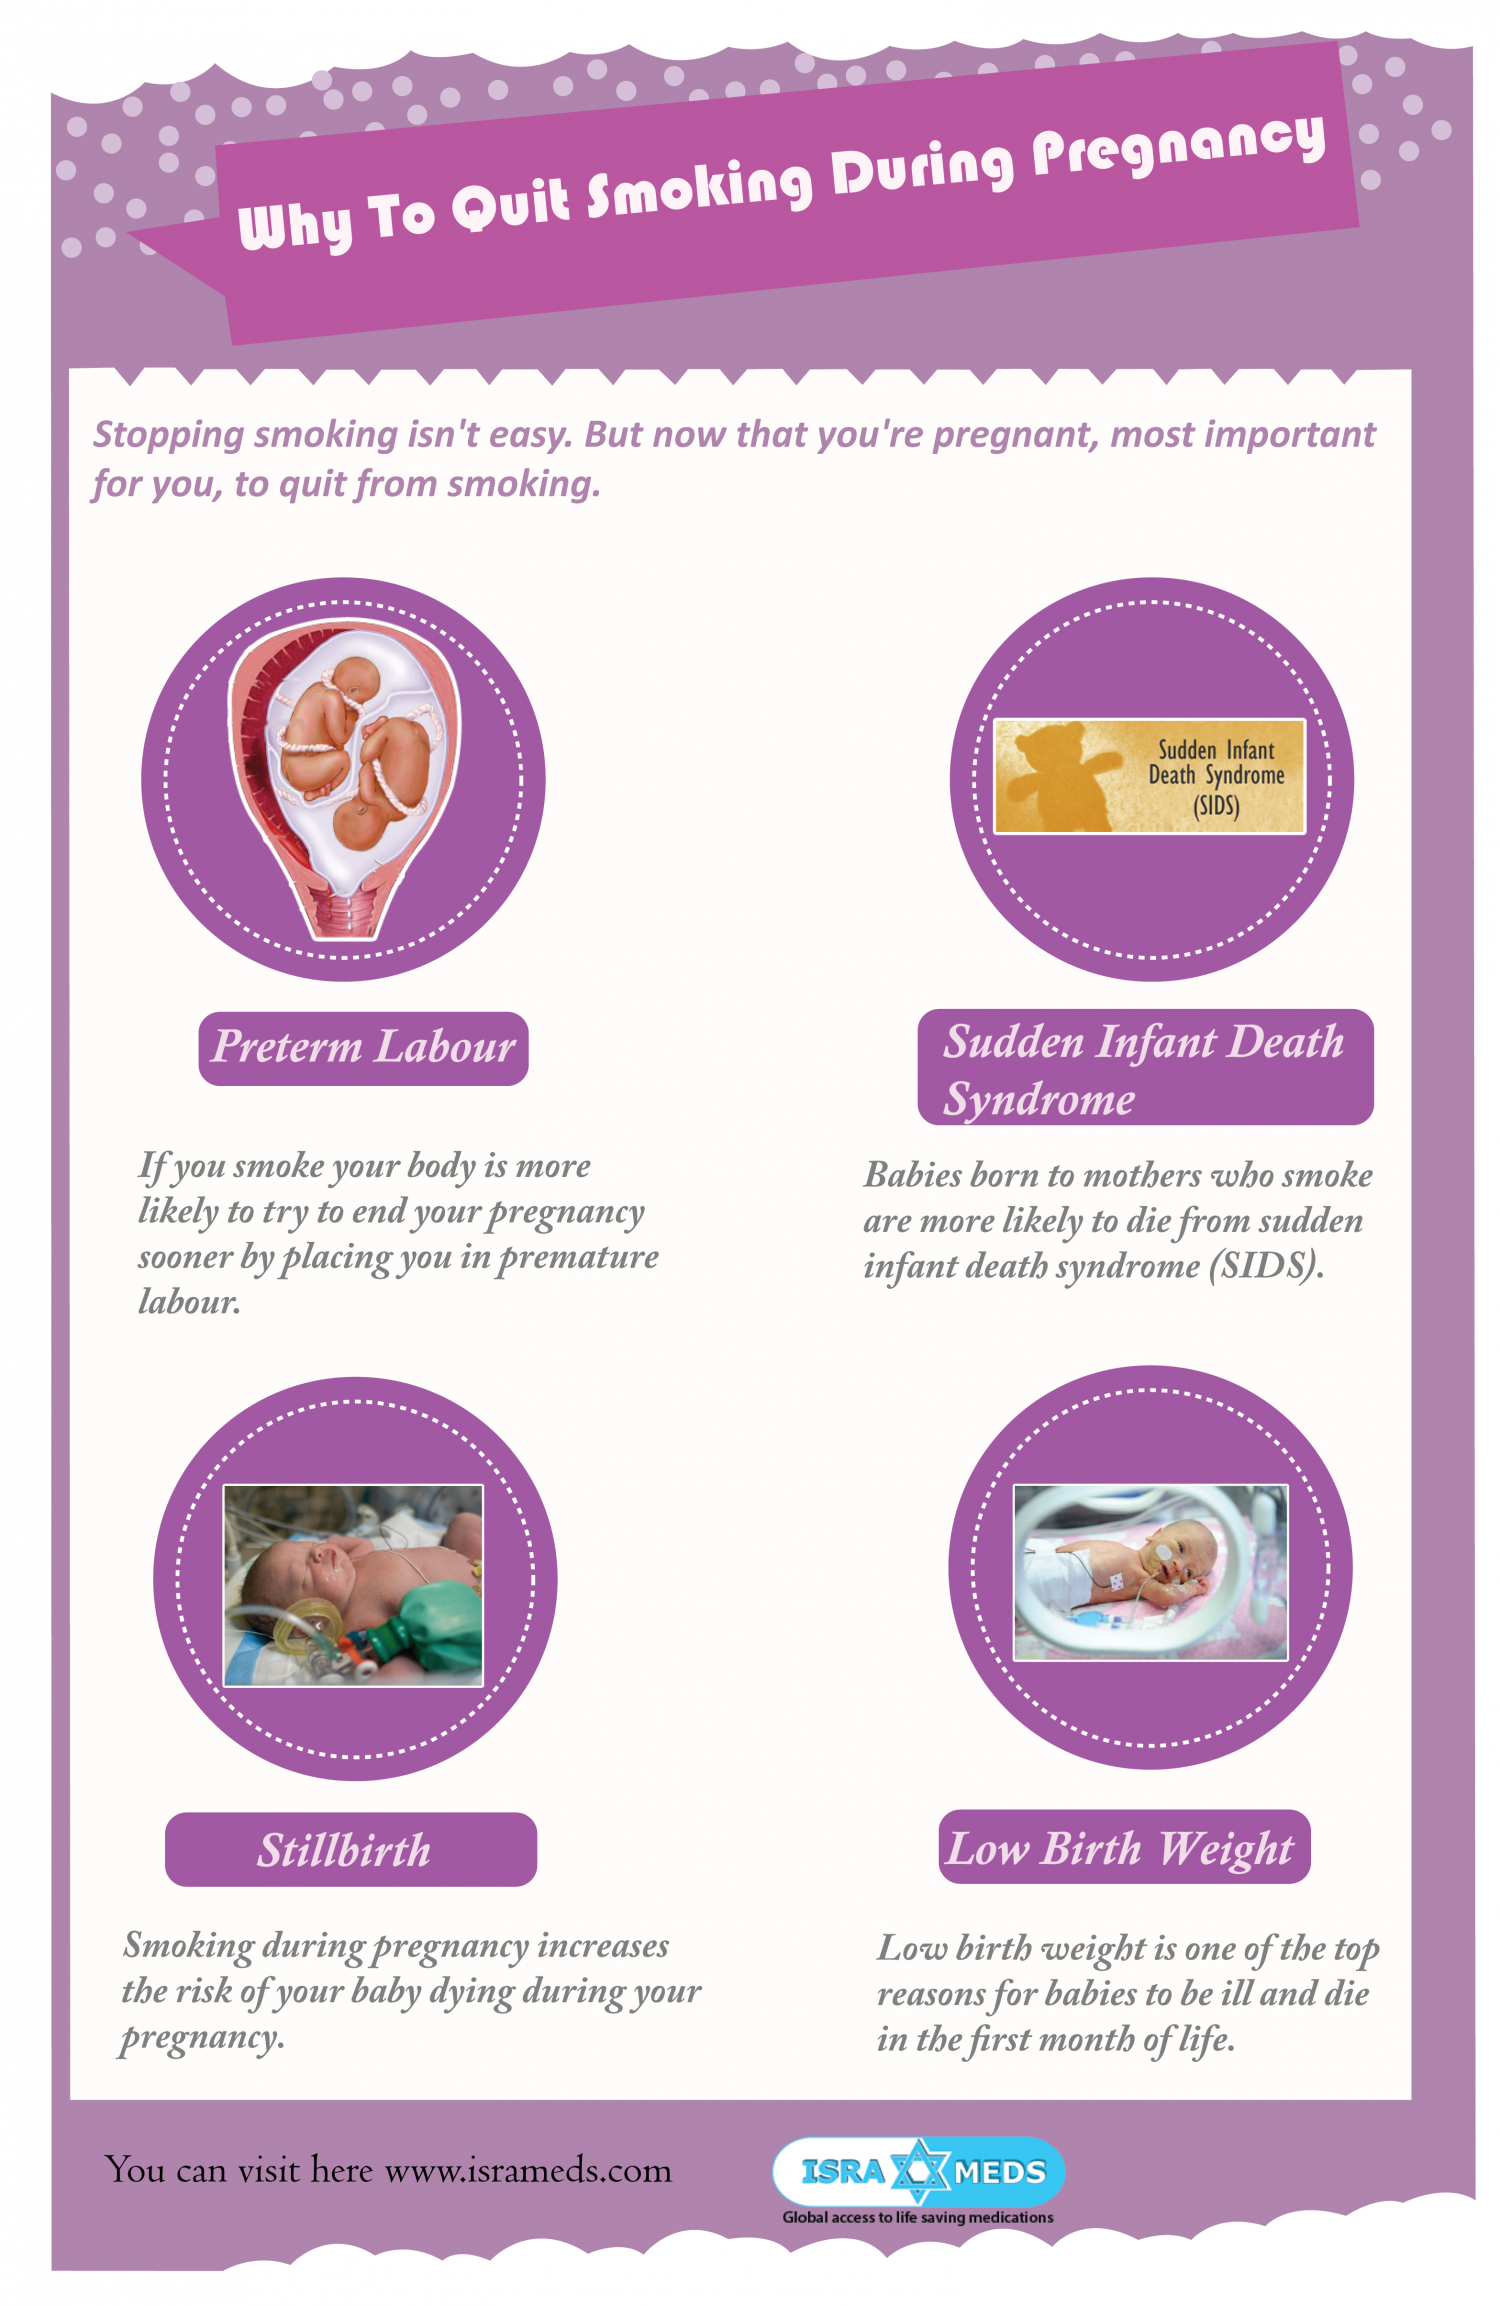 Why to quit smoking during pregnancy